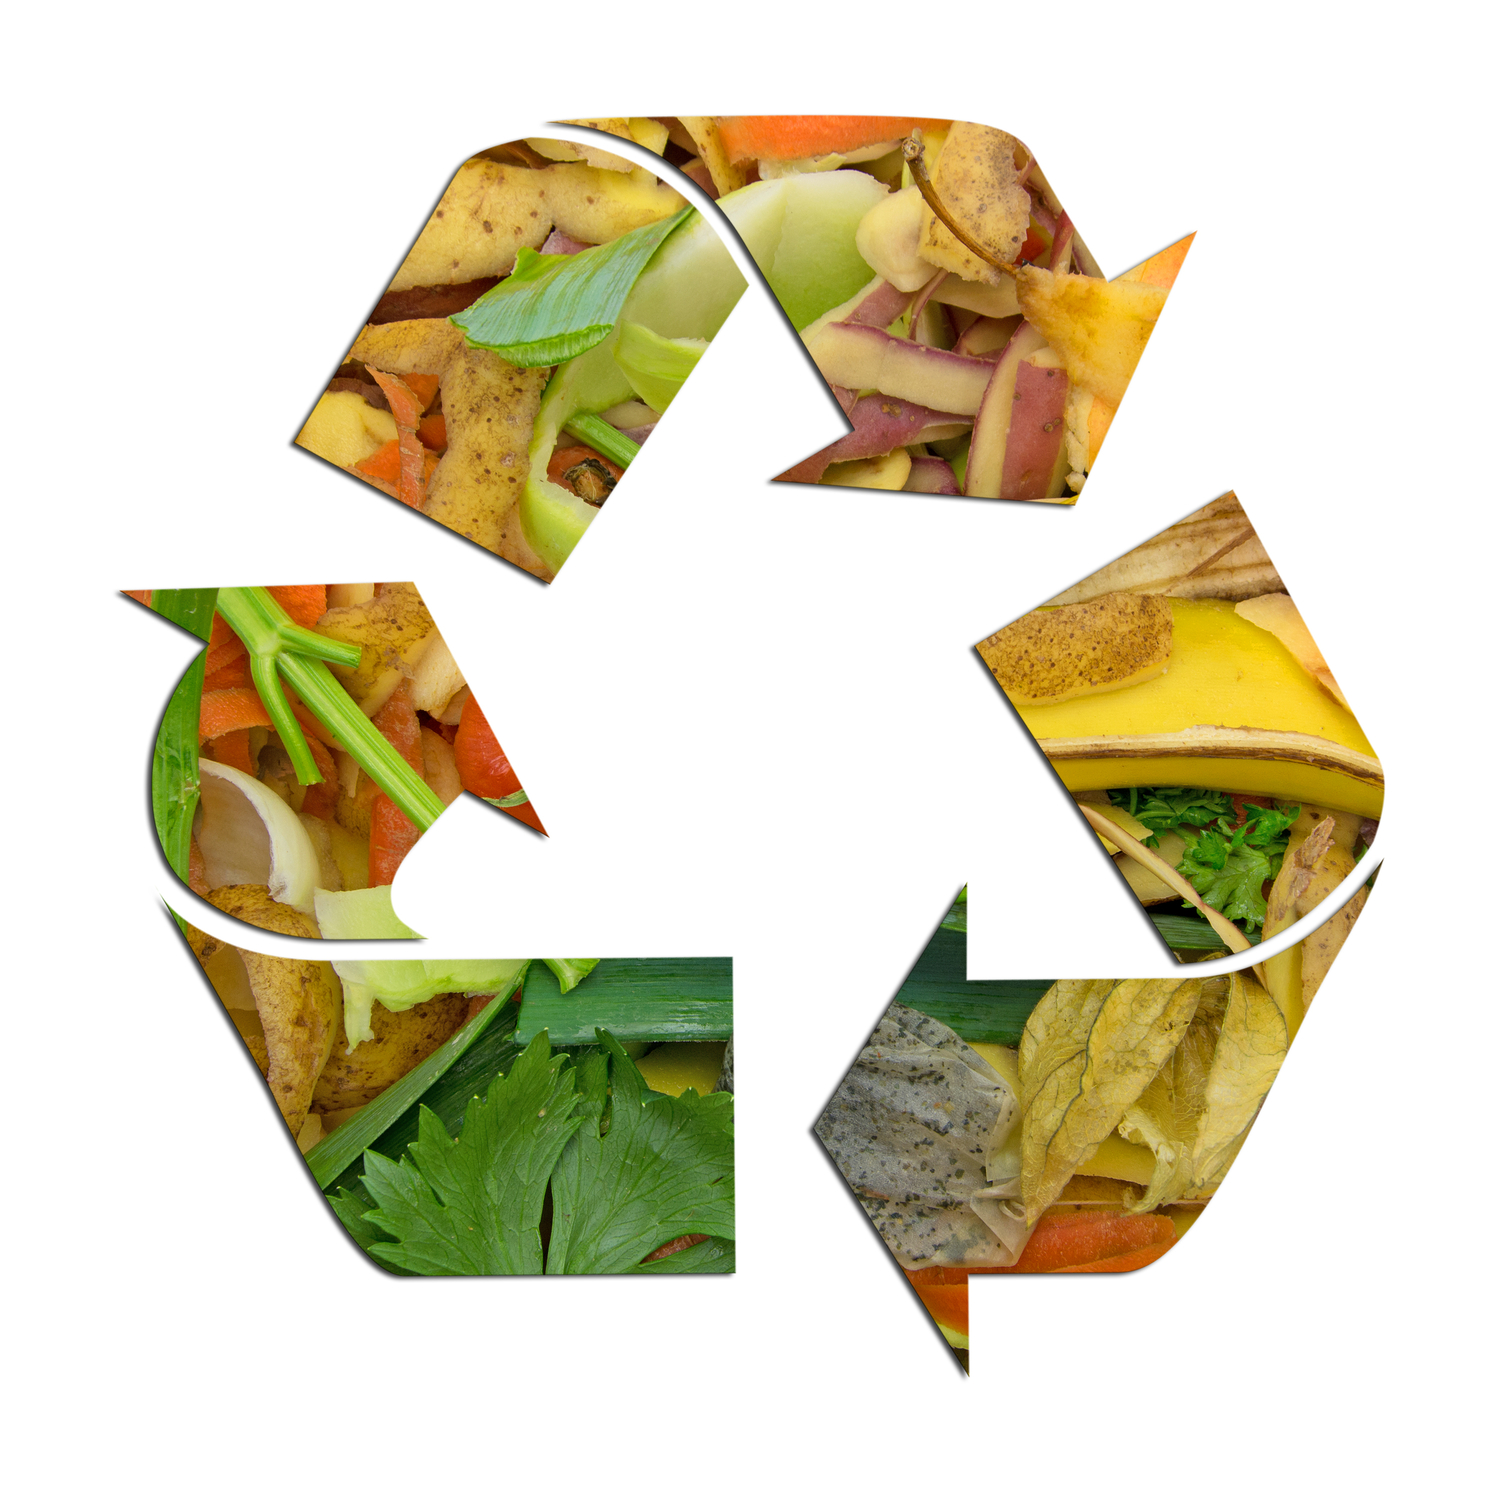 RE-6-P2P: Decentralized management of organic waste